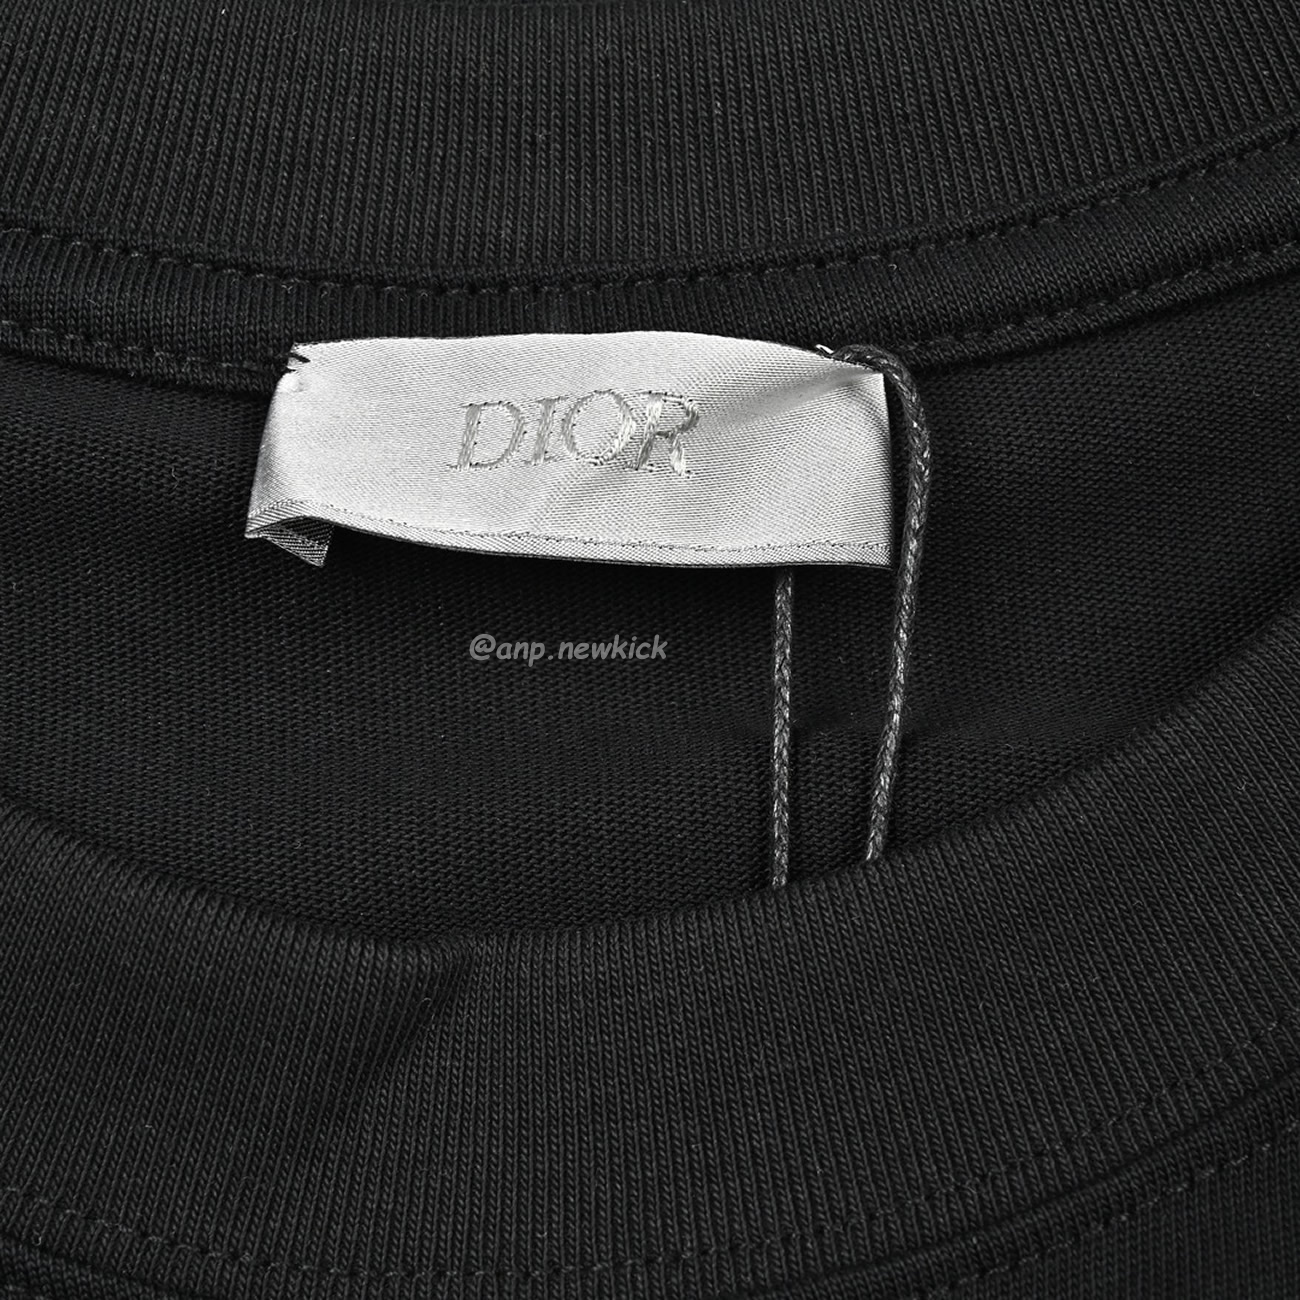 Dior 24ss Pin Logo Contrasting Embroidered Short Sleeved T Shirt (10) - newkick.org